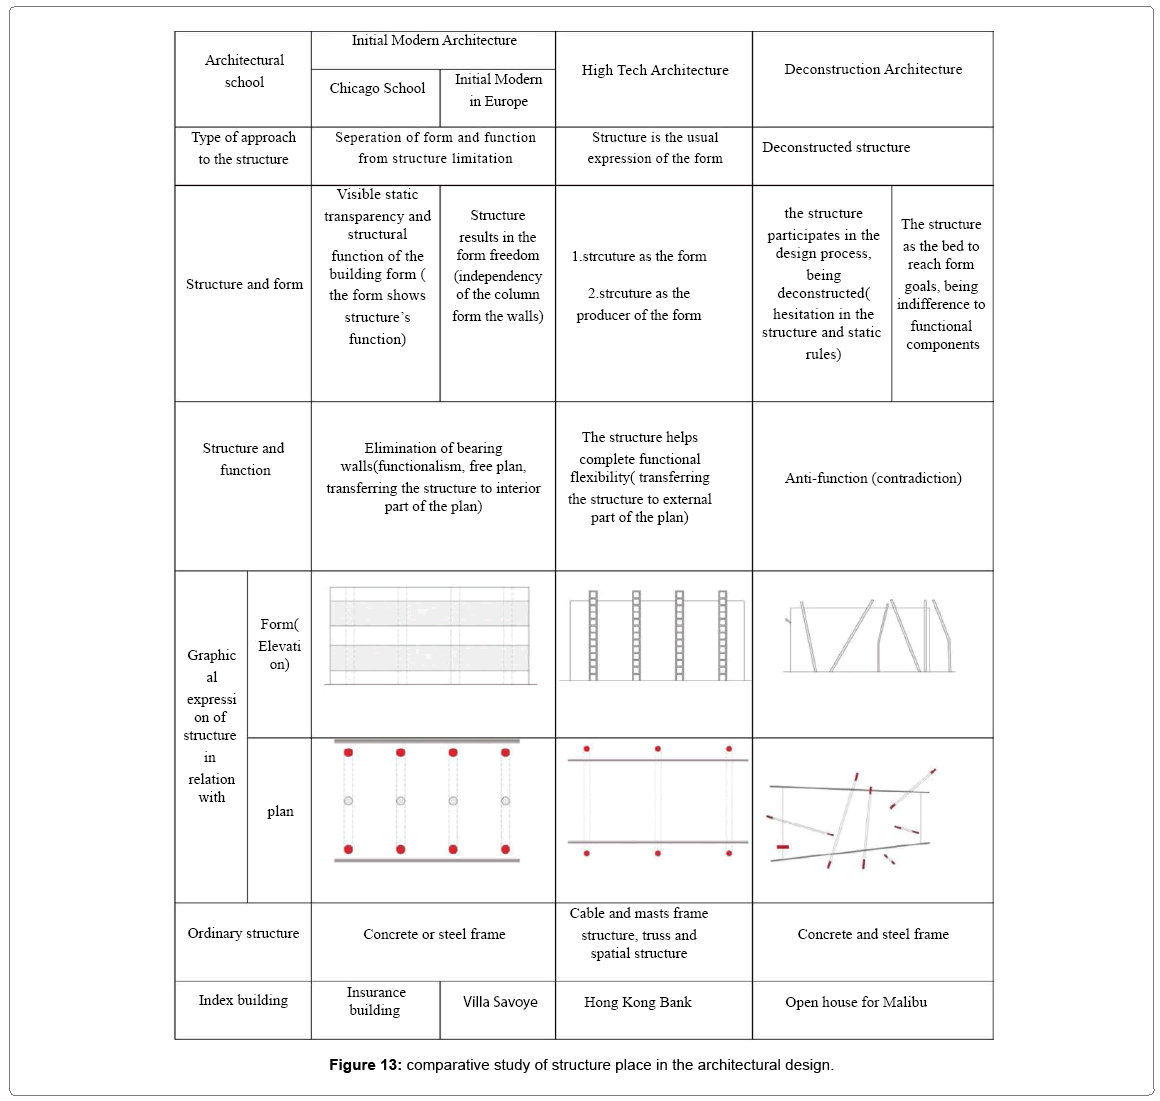 architectural-engineering-comparative-study-structure